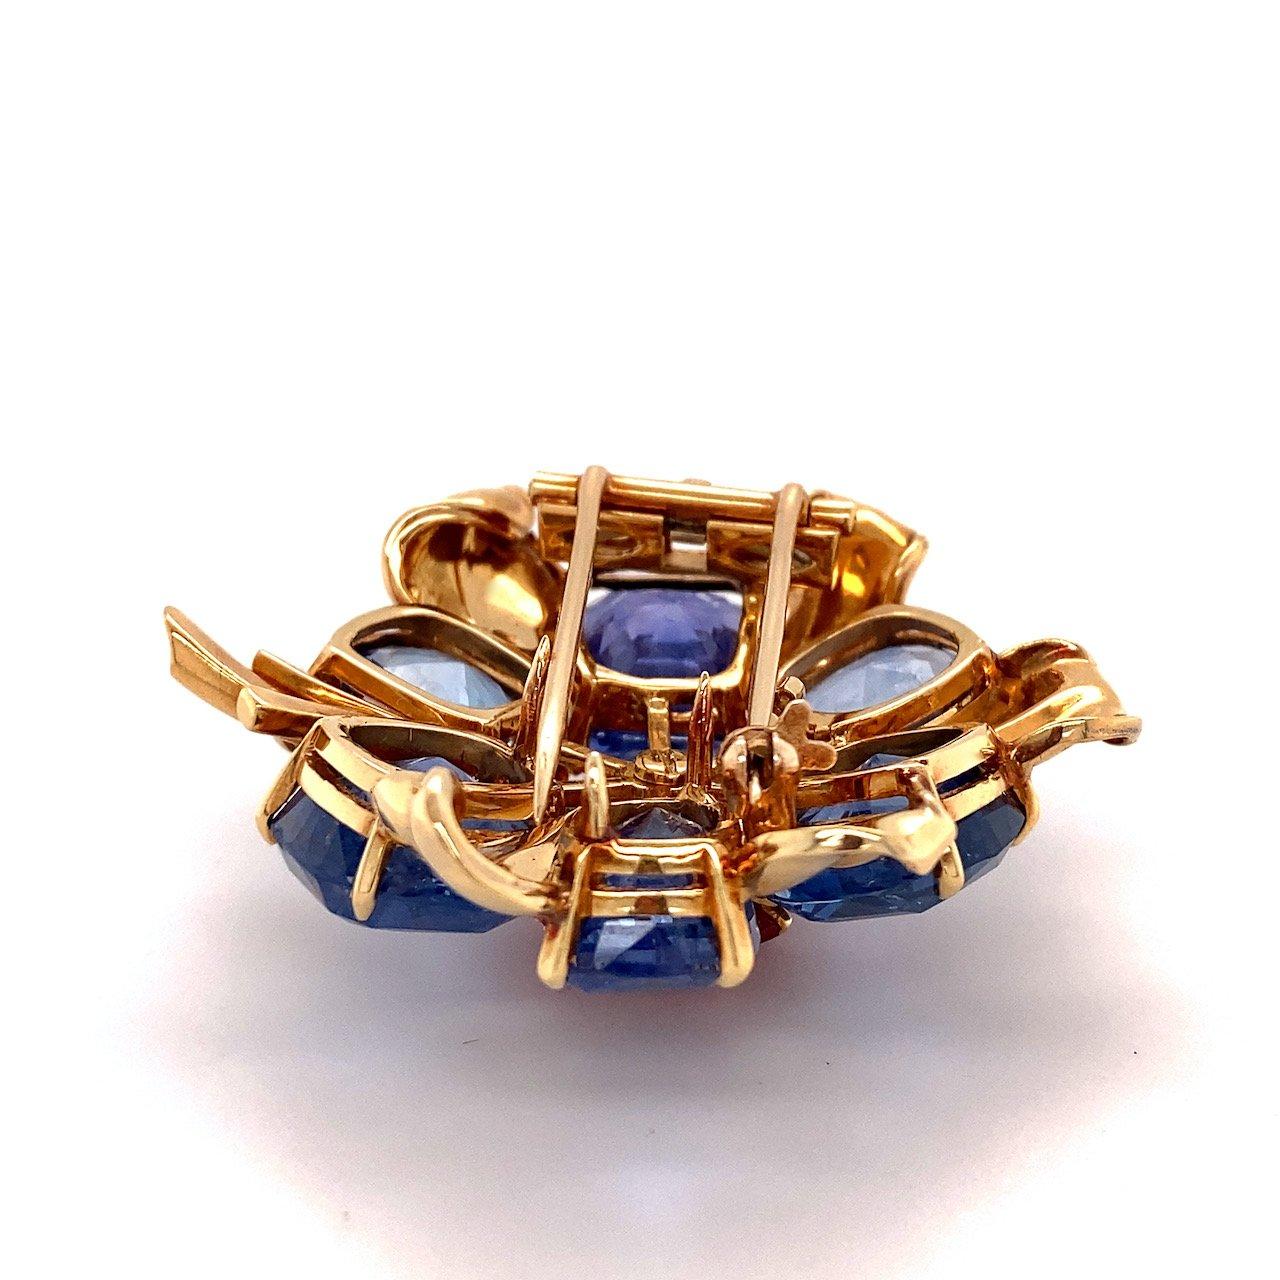 Vintage Van Cleef & Arpels Blue Sapphire & Ruby Brooch, 18KT Yellow Gold For Sale 2